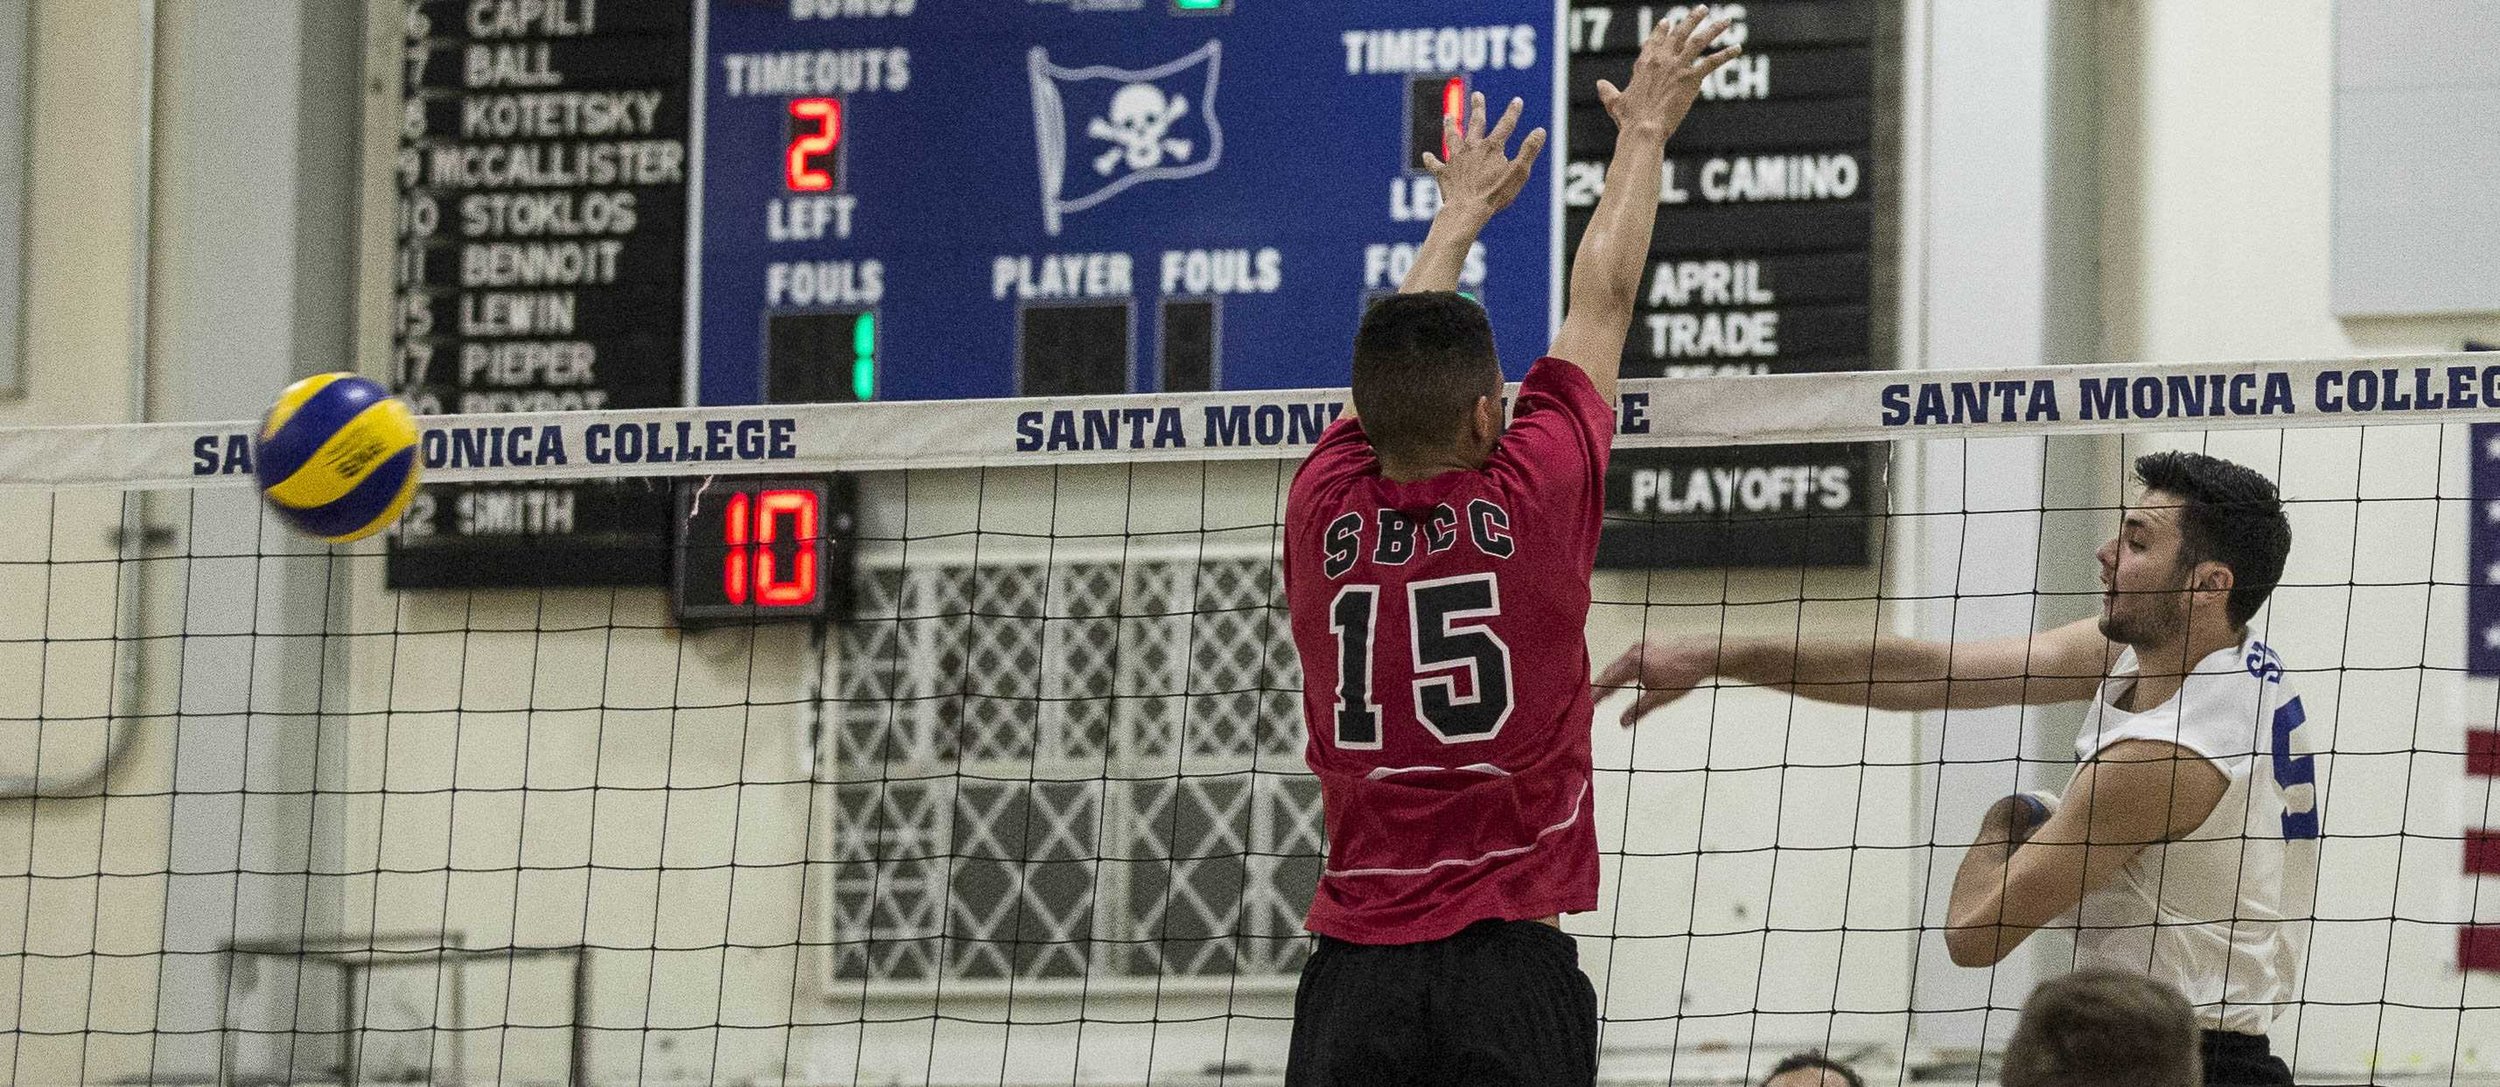  Santa Monica College Corsair freshmen right-side hitter Andrew Dalmada (5, right) successfully attempts a powerful spike as Santa Barbara Vaqueros freshman middle blocker (15, left) fails to defensively block the ball, allowing the Corsairs to score